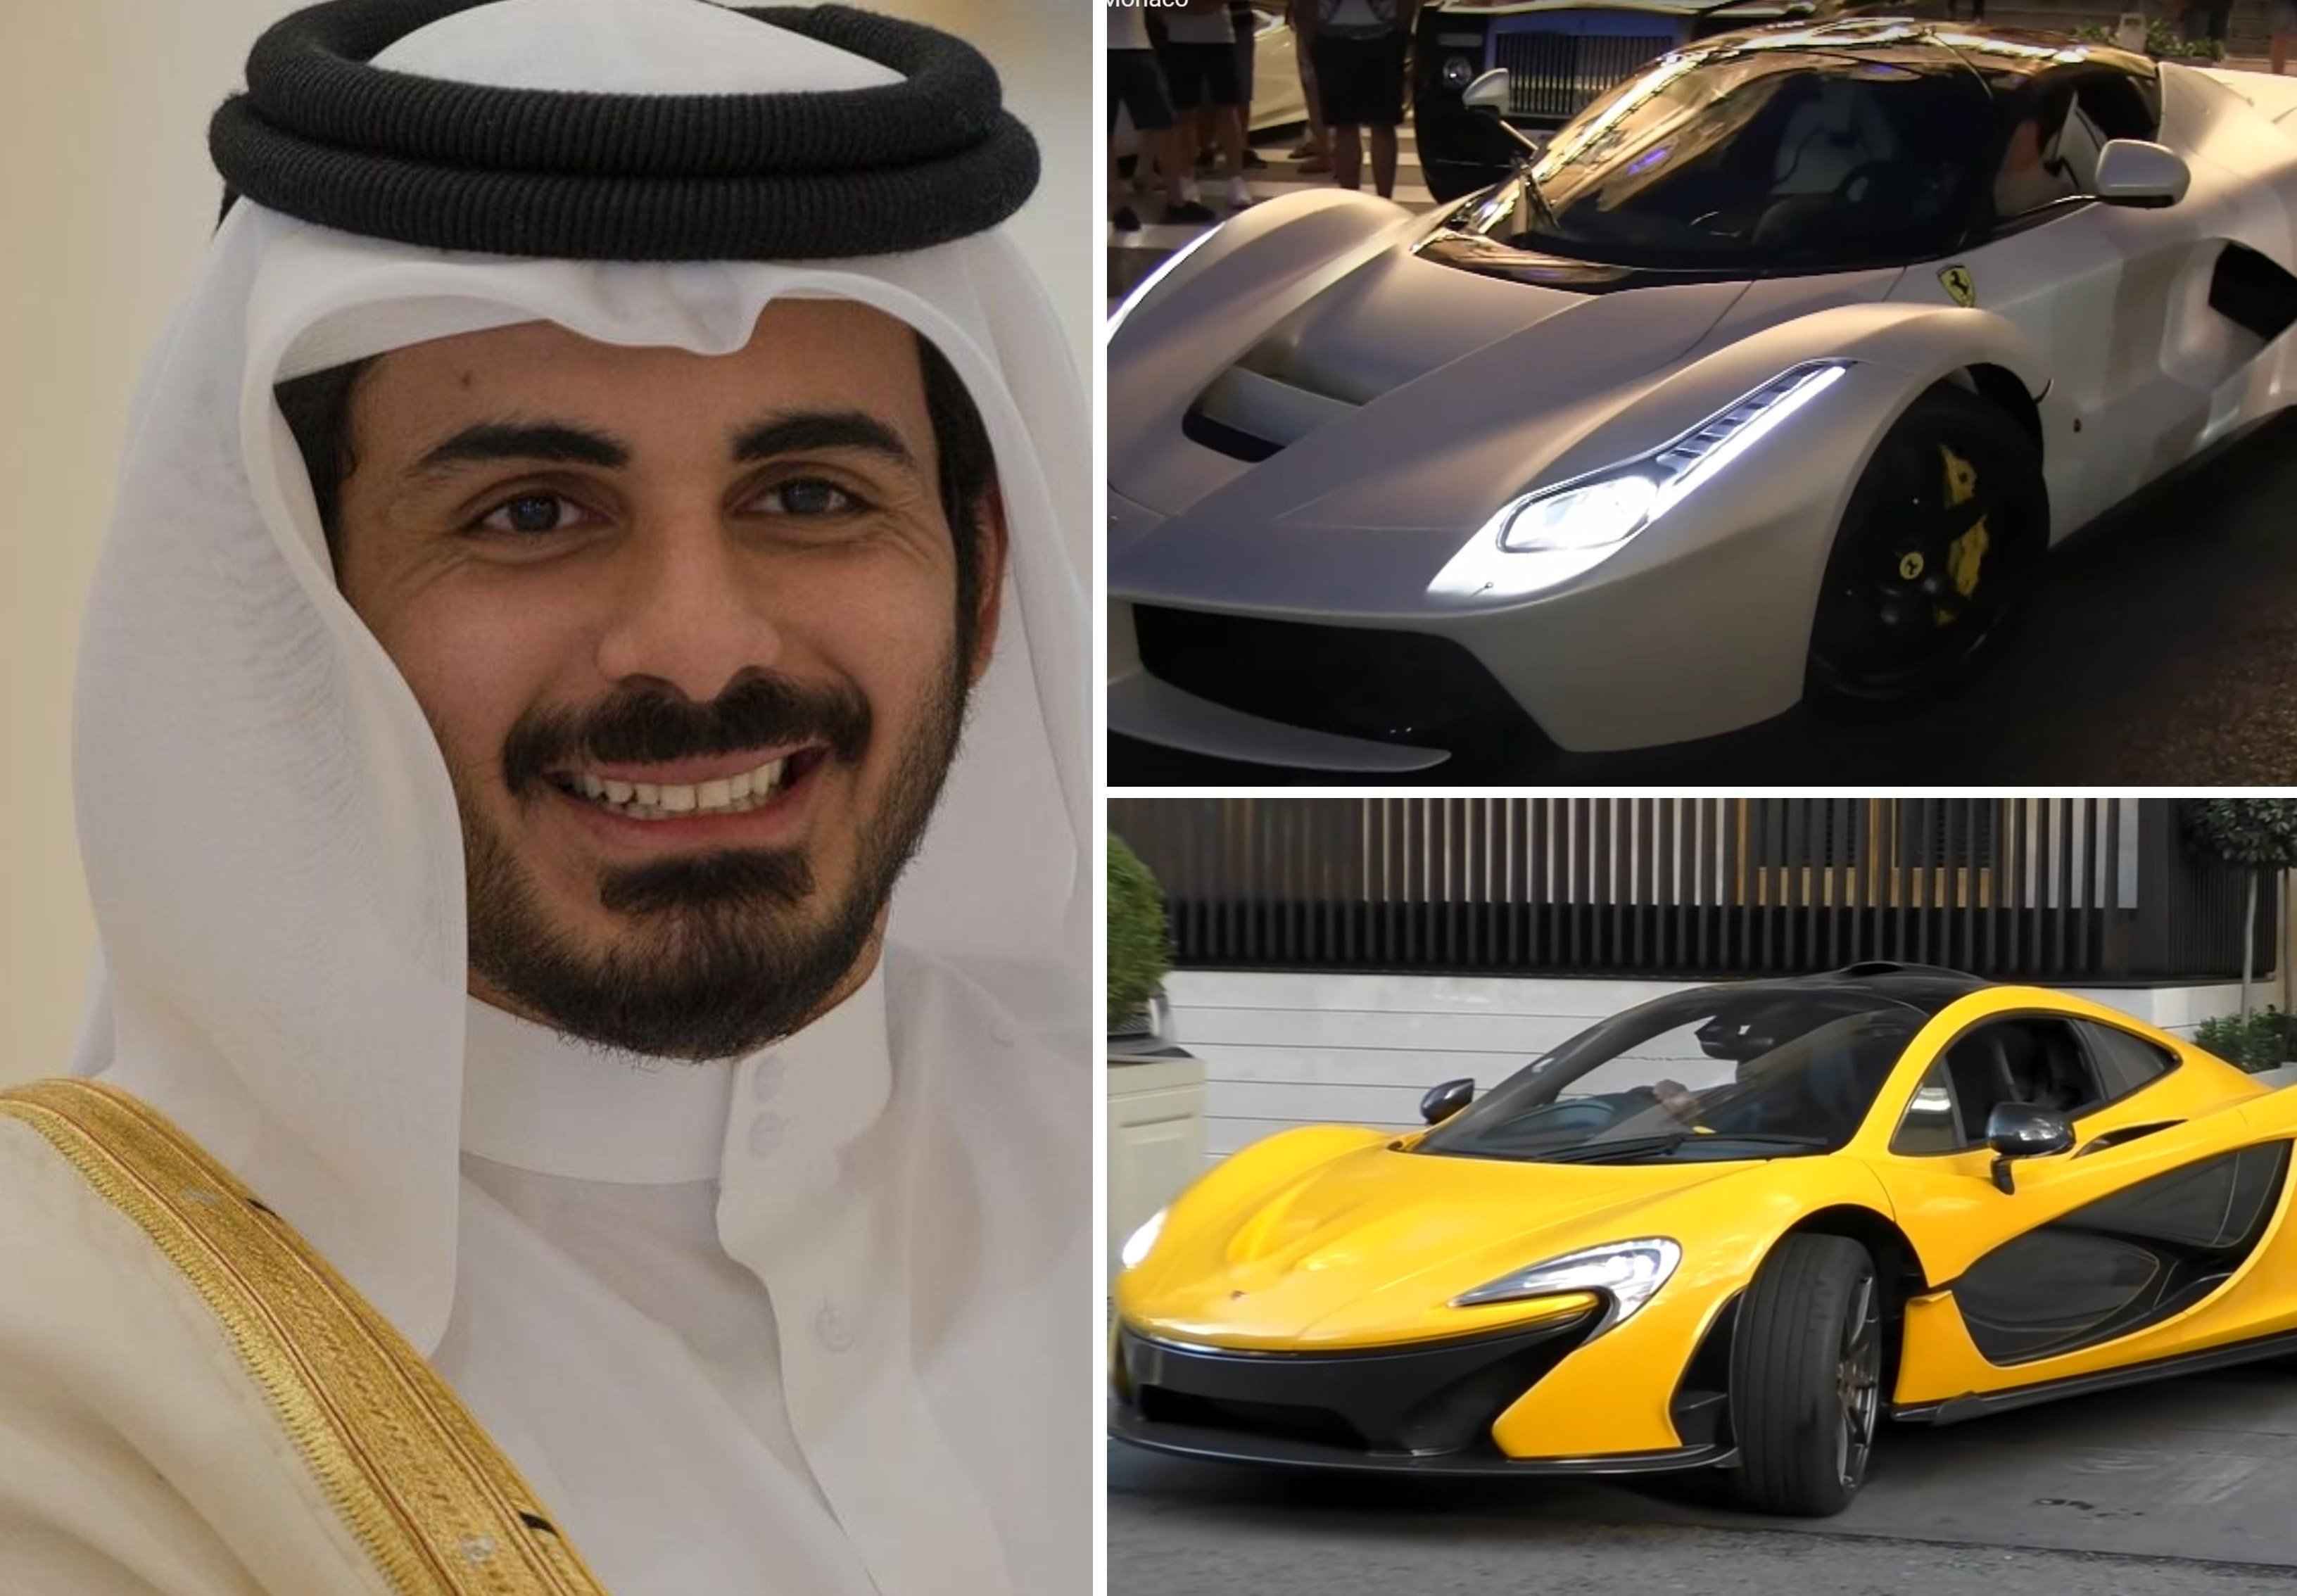 THE WORLD'S RICHEST MAN'S CAR COLLECTION IS DAZZLING 